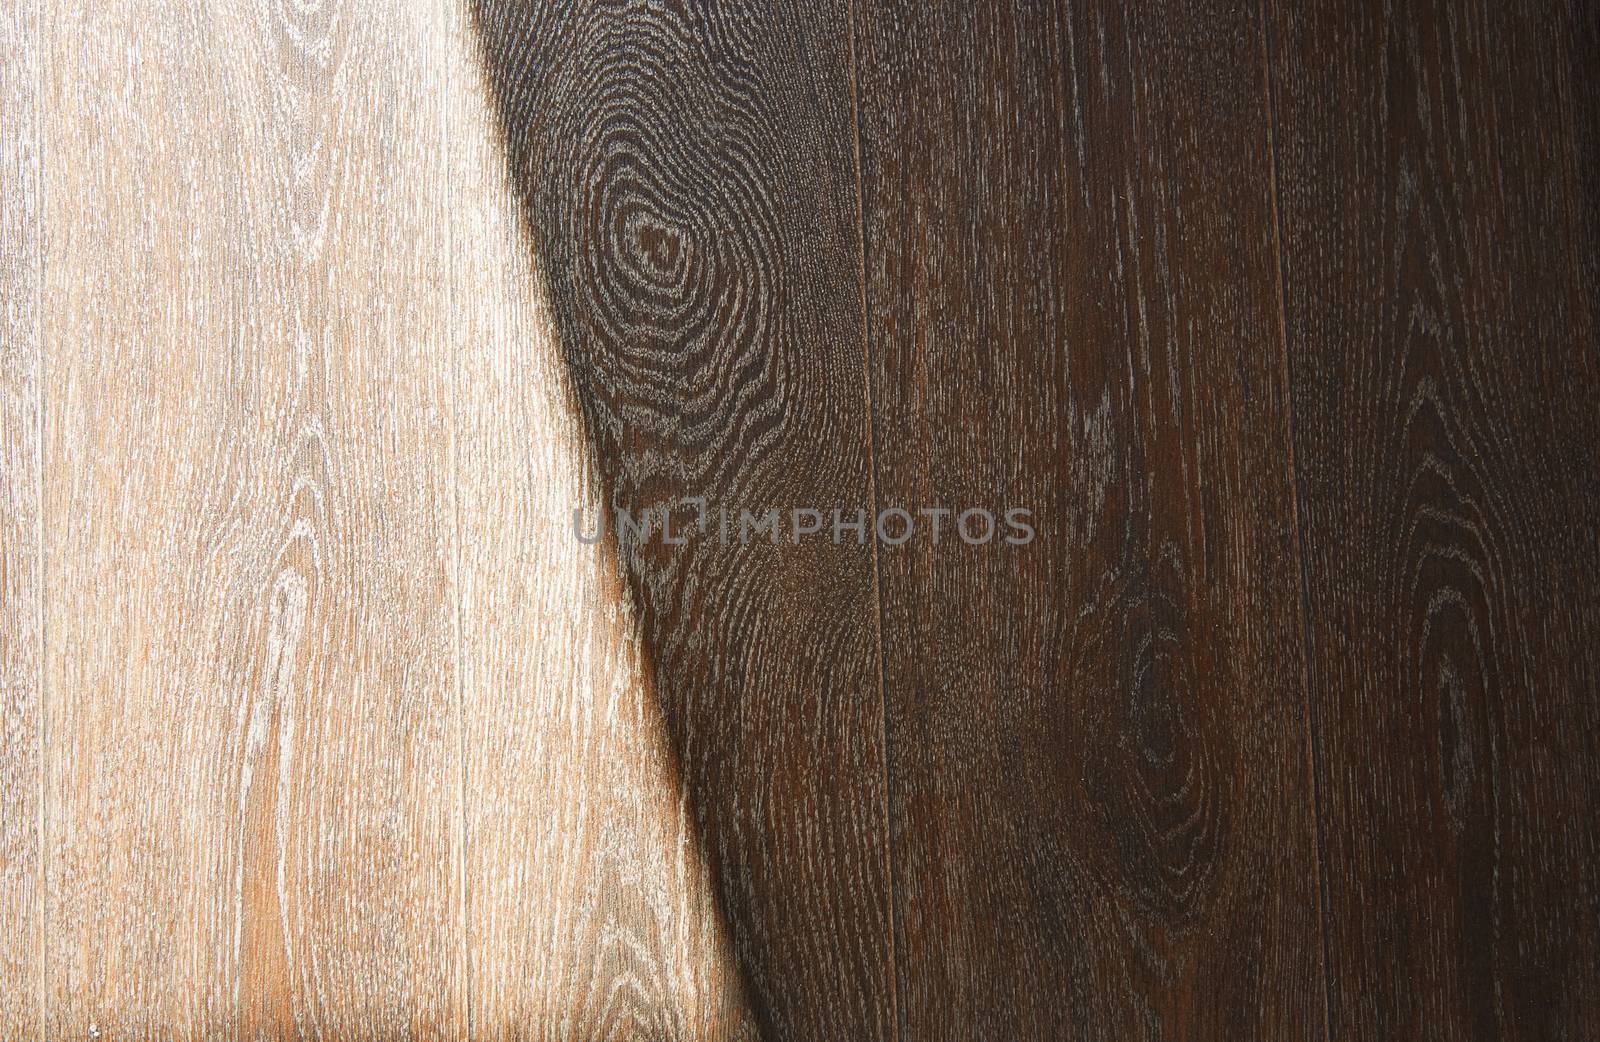 Wooden texture with sunlight and shade